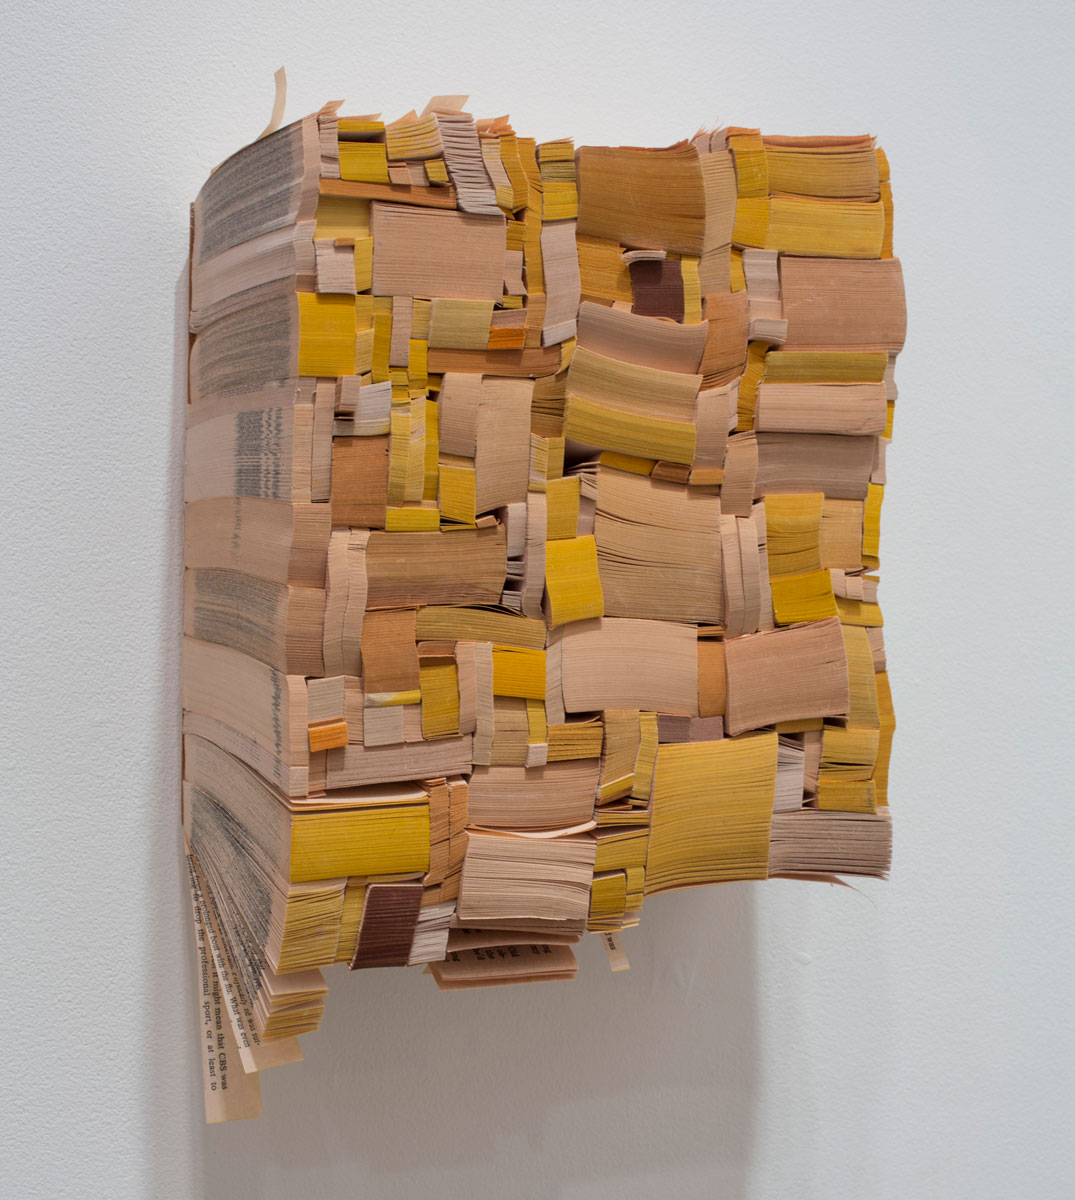   Word , 2013 paperback book slices, wood and bookbinder's glue 9.5 x 8.75 x 4" 